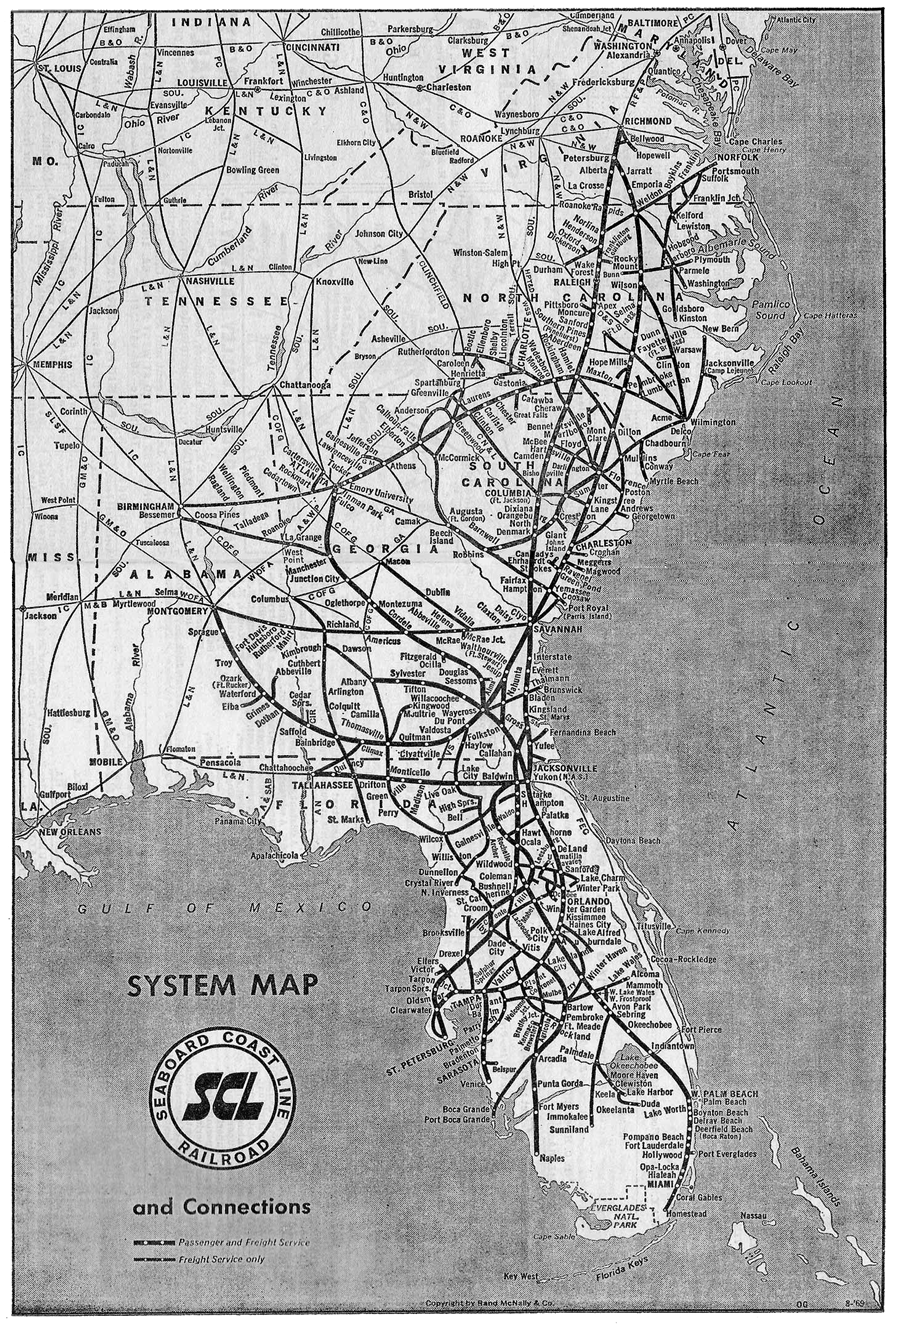 scl_map1969